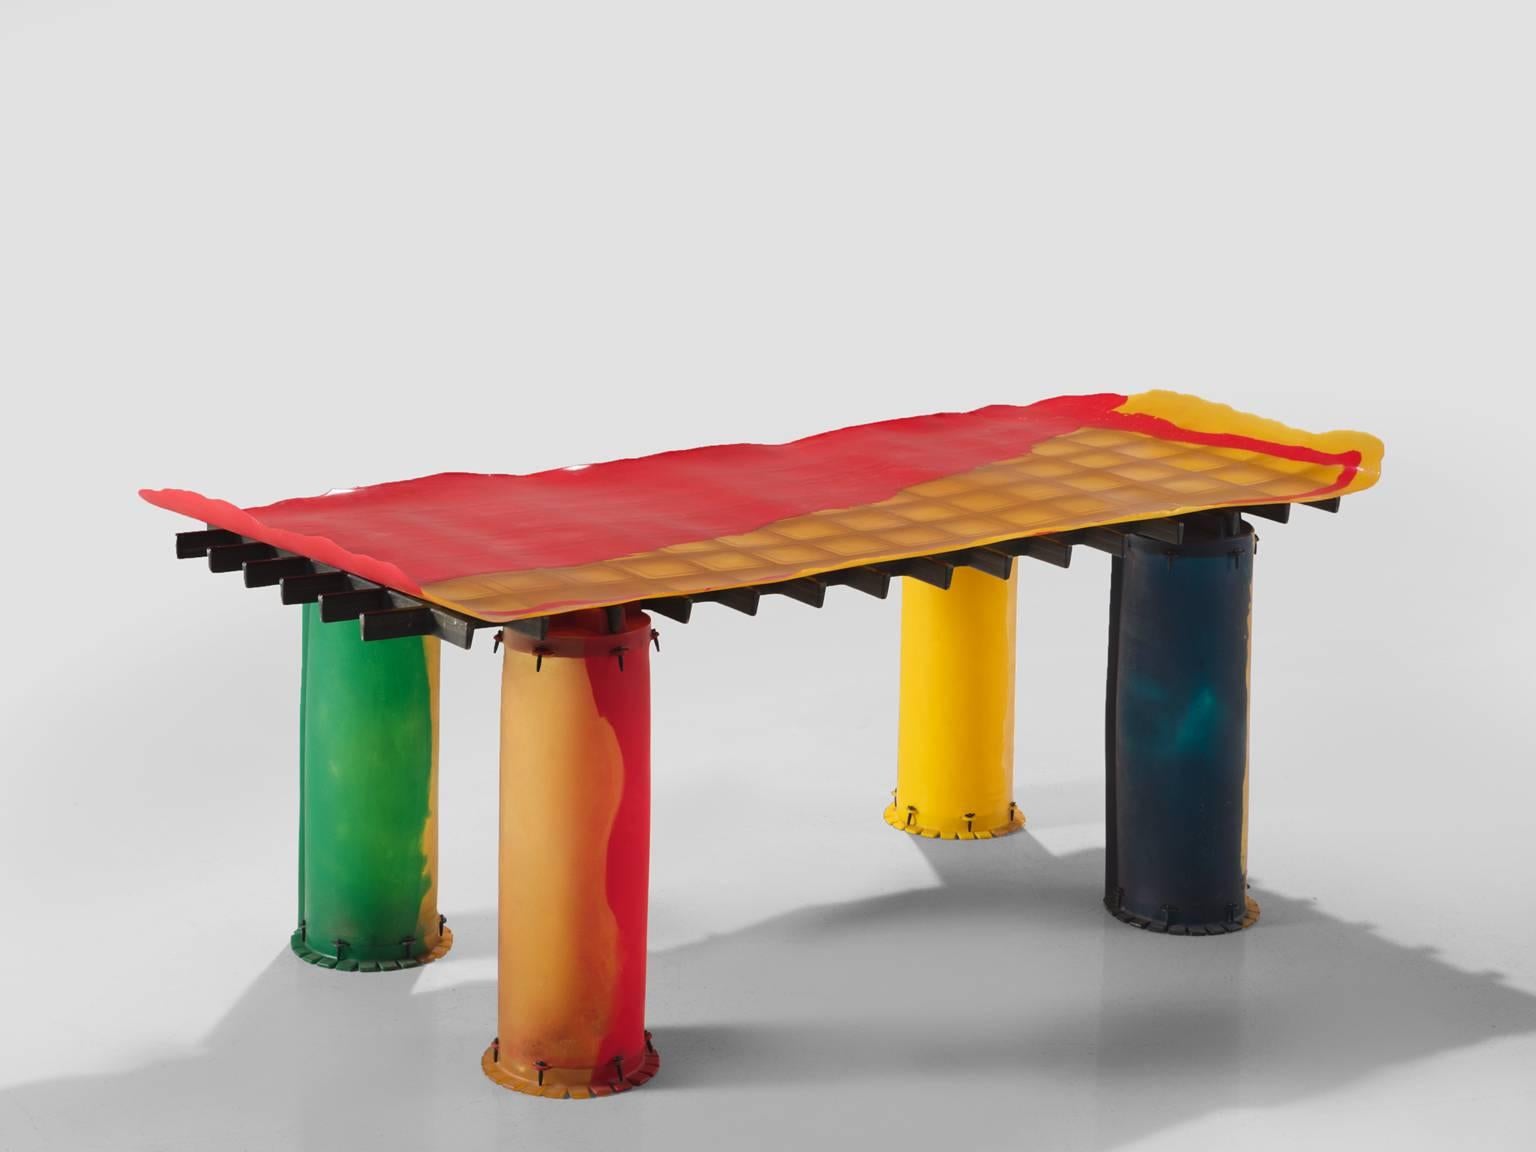 Gaetano Pesce for Zerodesigno, 'Nobody's Perfect' dining table, red, blue, green and yellow resin, metal, Italy, 2002.

This sculptural dining table is designed by Gaetano Pesce. The title of the table 'Nobody's Perfect' refers to the fact that